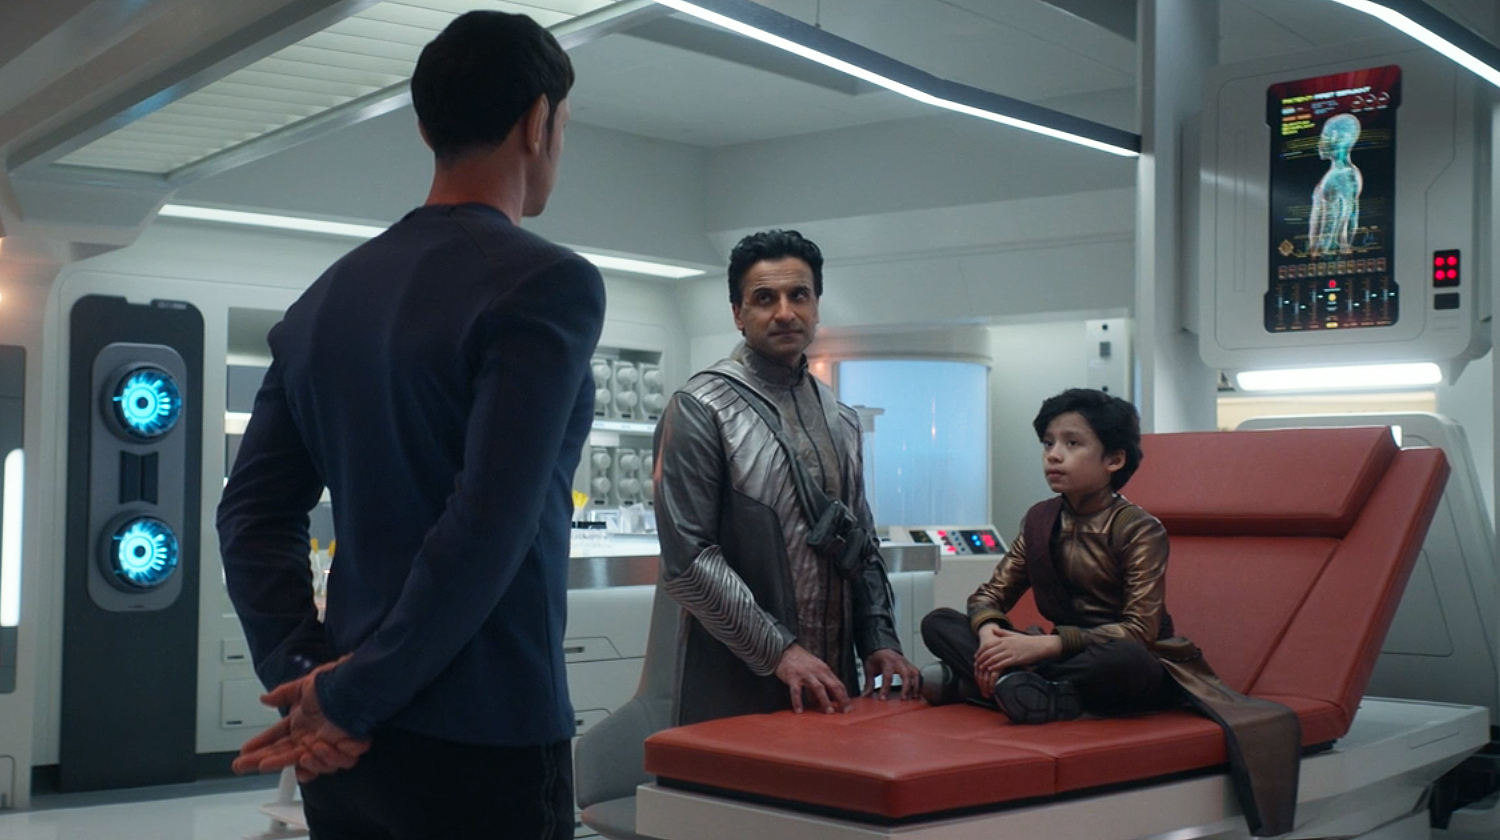 Spock in sickbay with the young First Servant of the Majalan people.